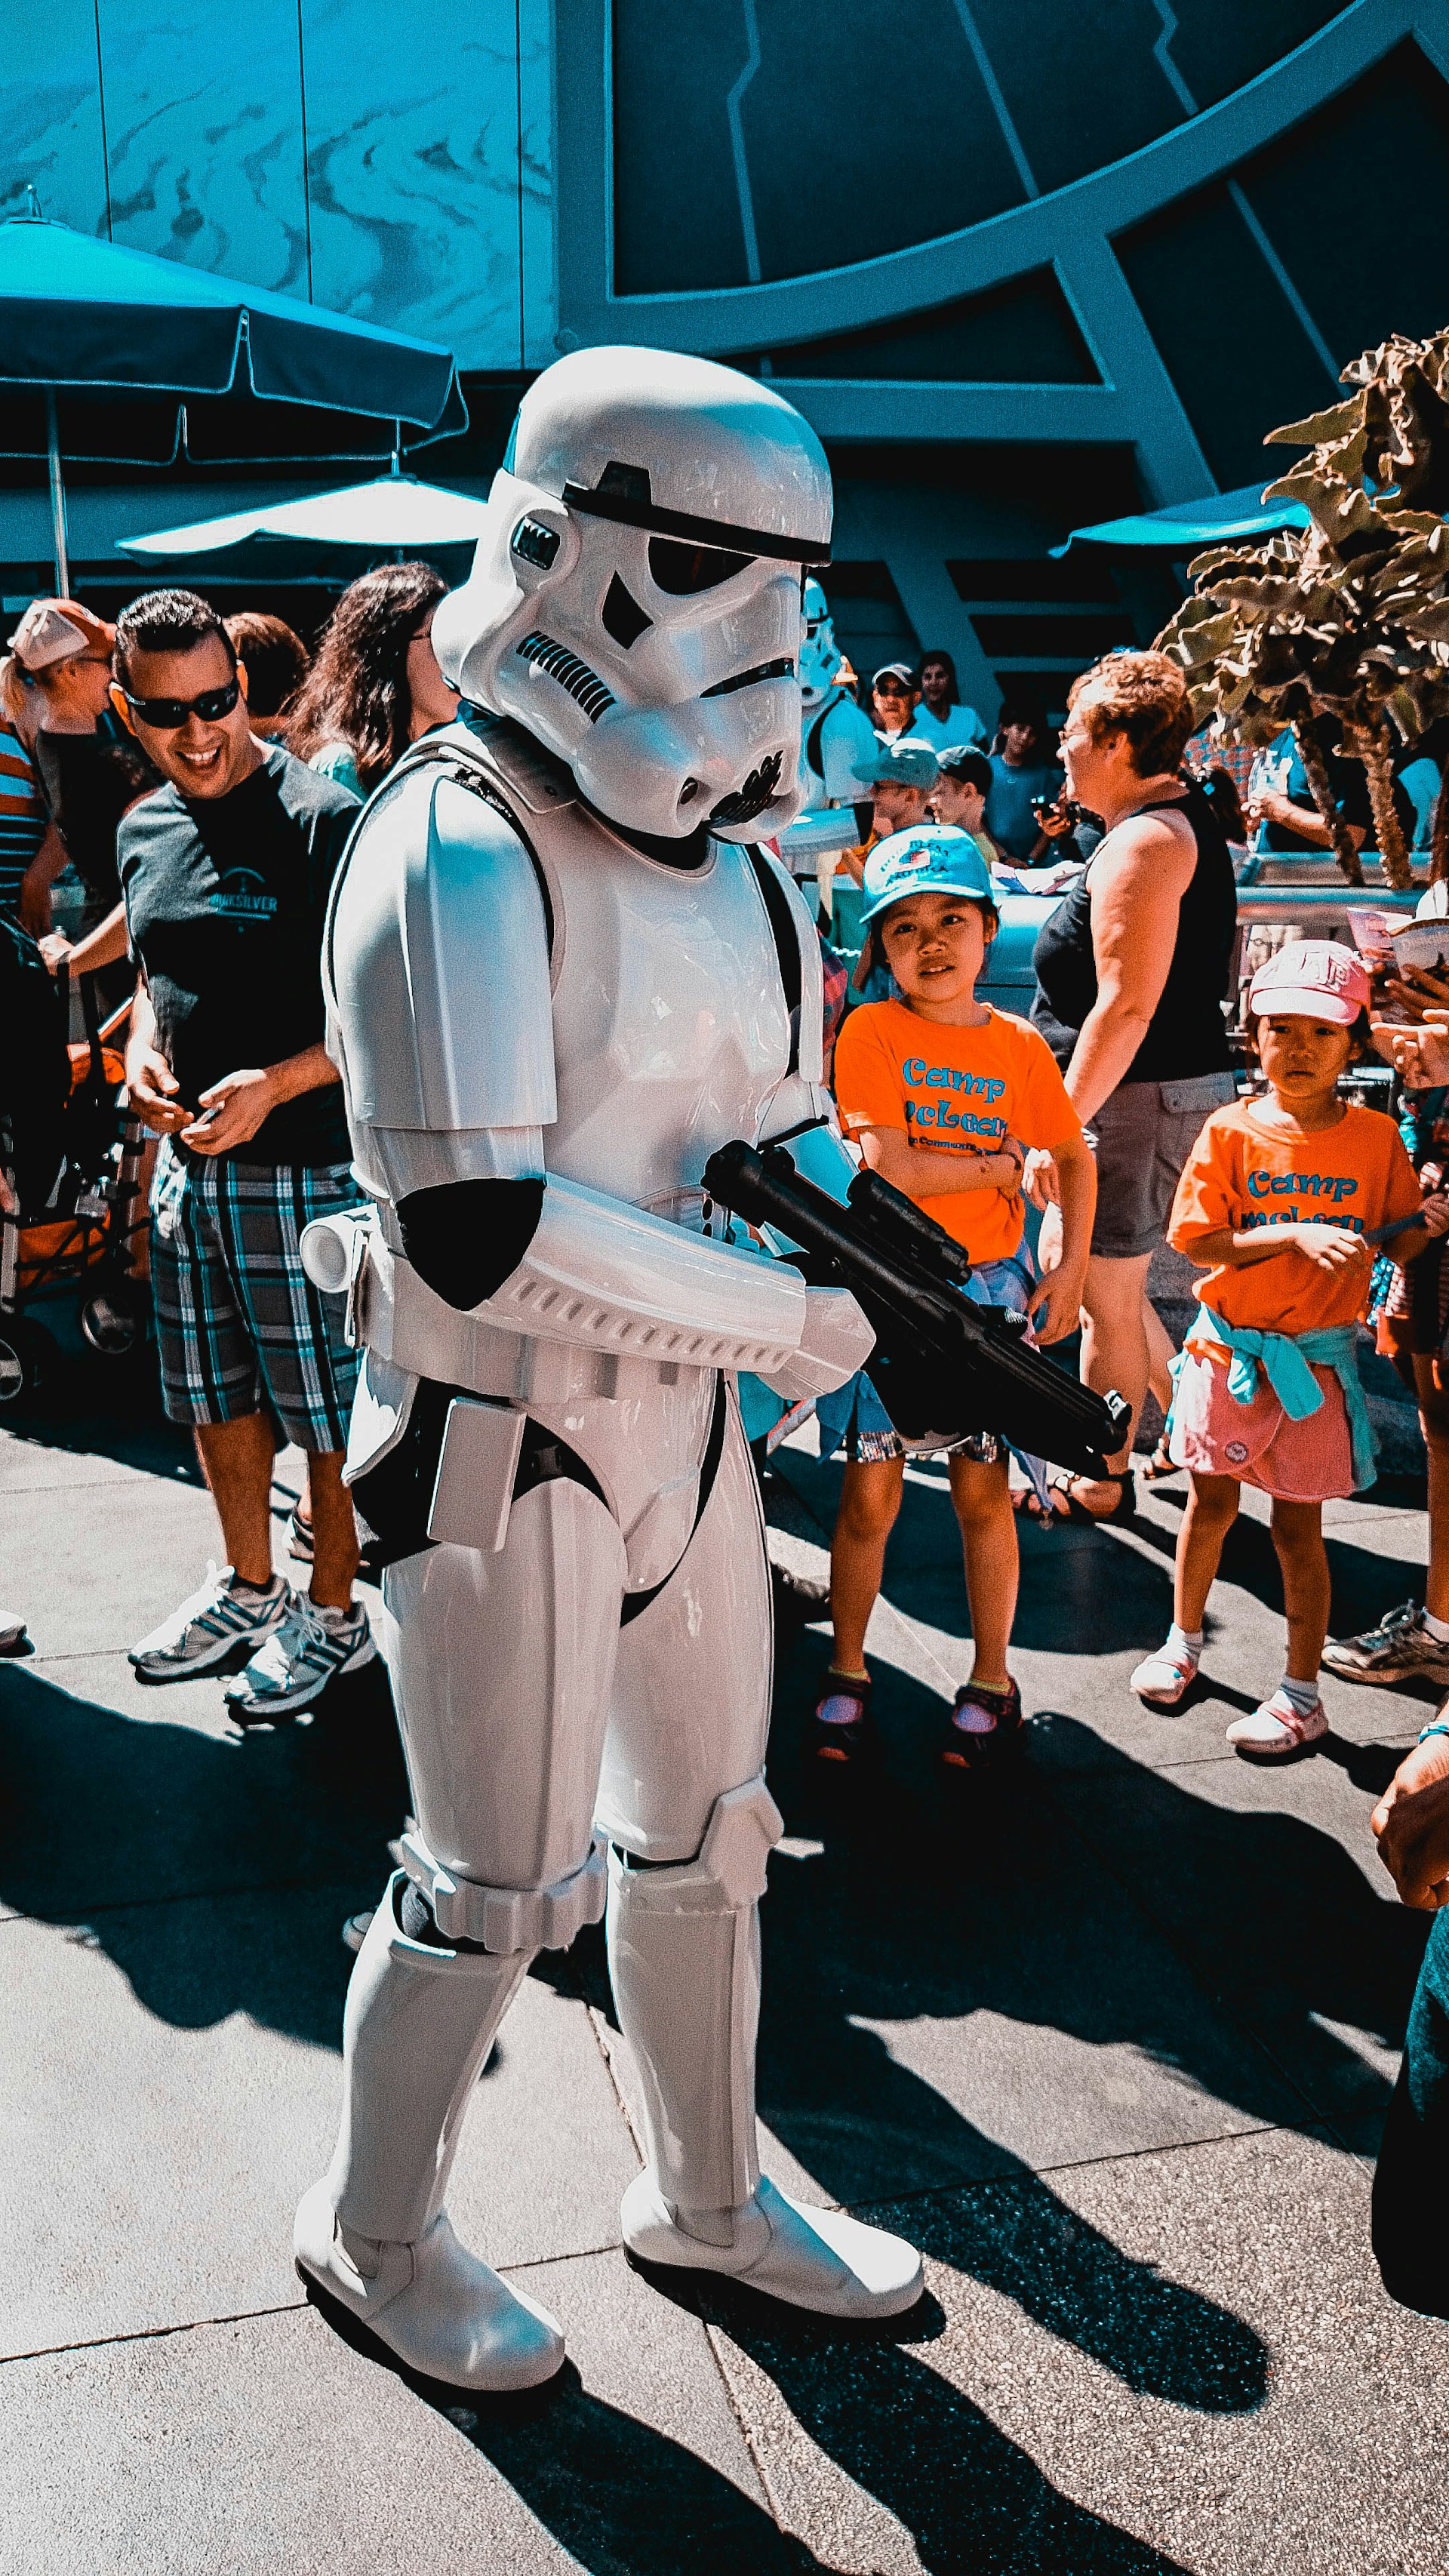 Photo of someone dressed as a storm trooper at a convention